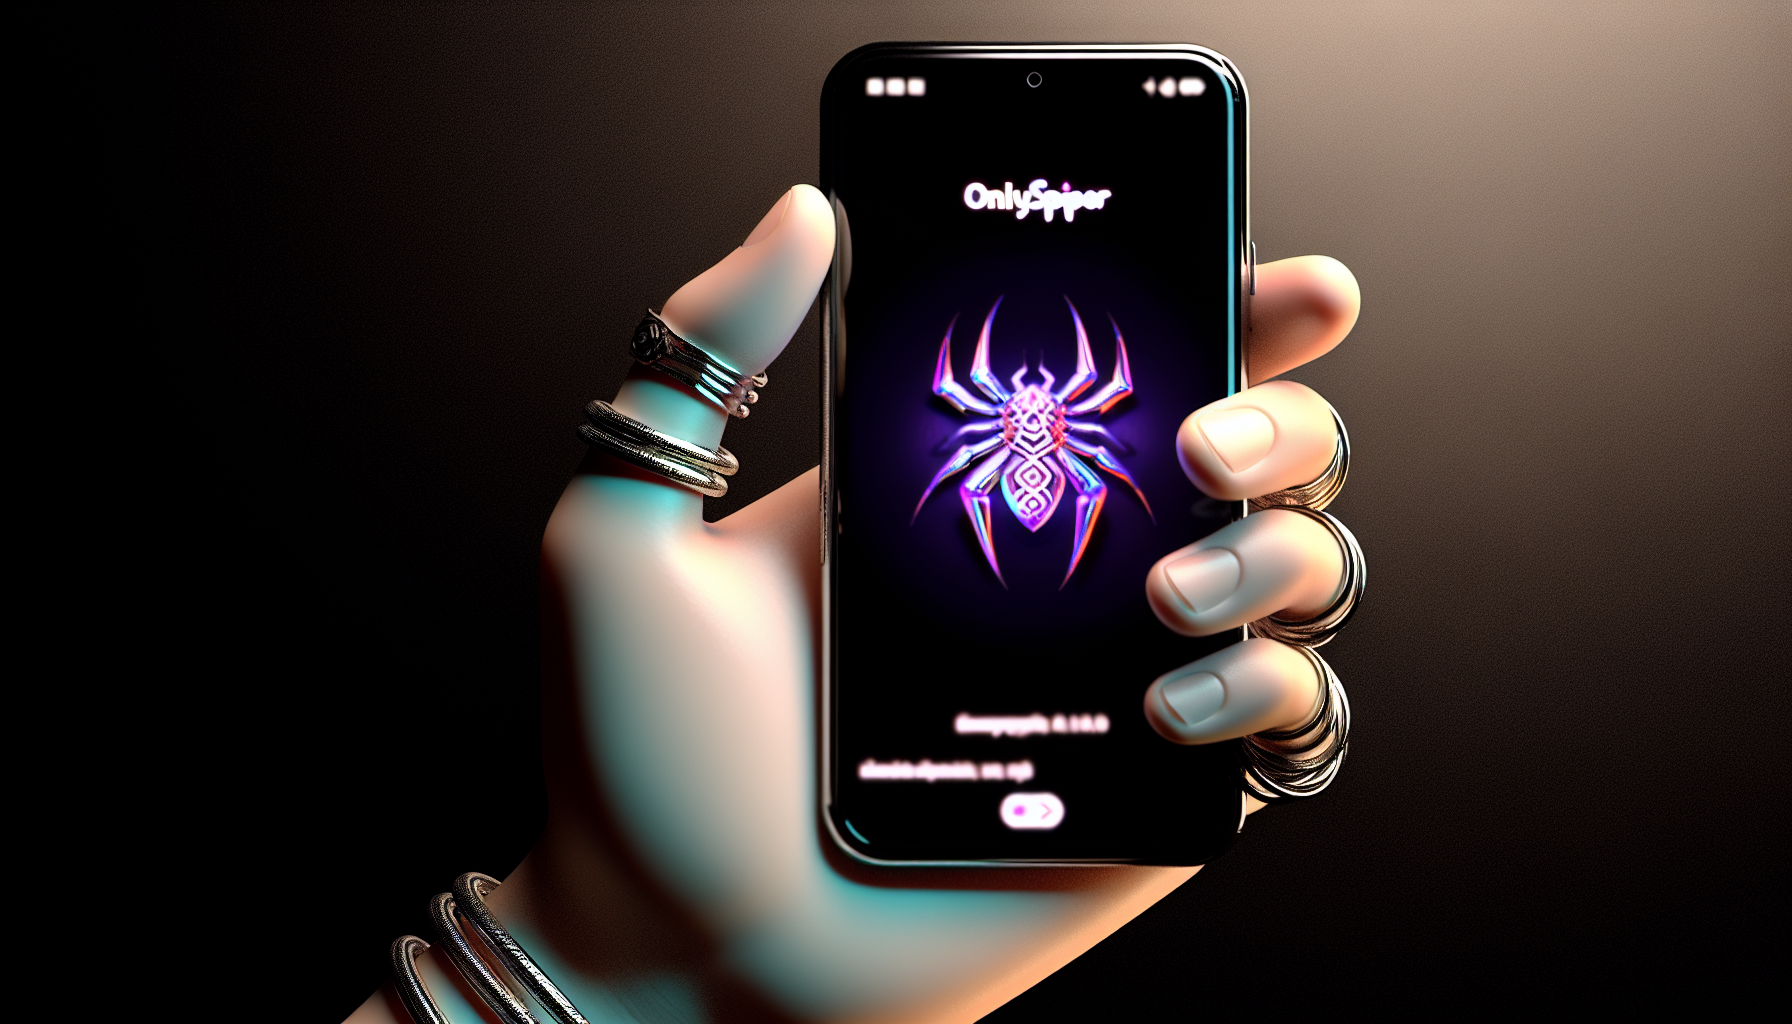 A mobile phone with the OnlySpider logo on the screen